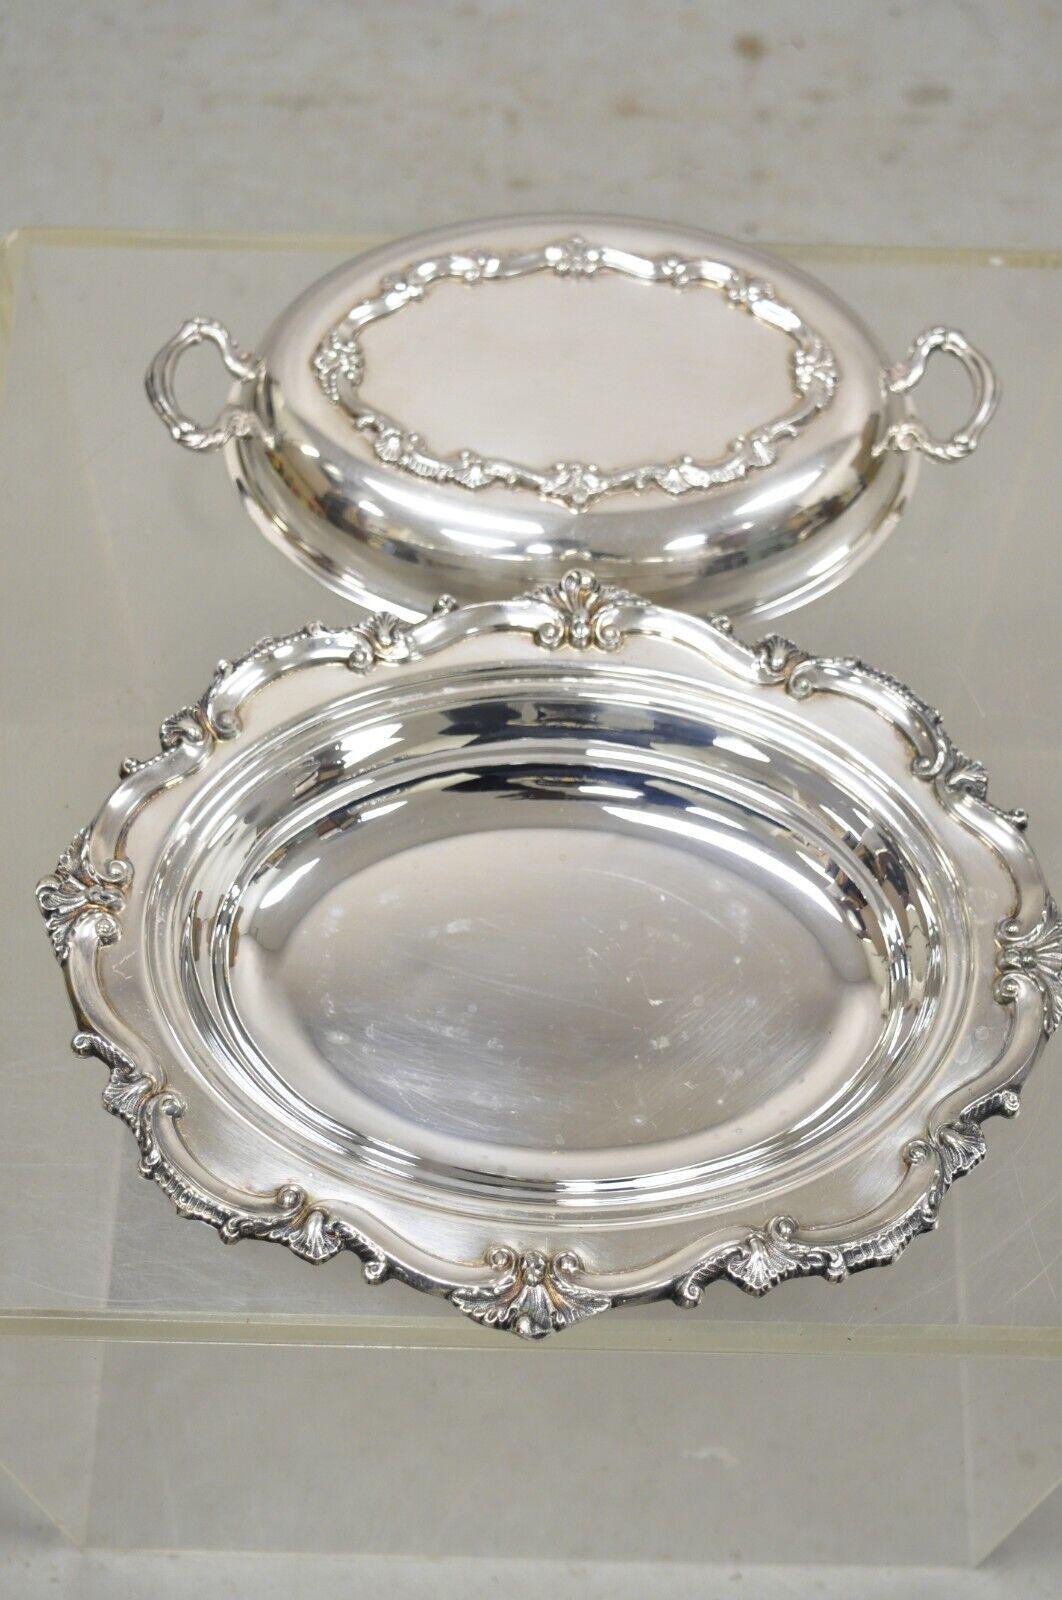 Victorian Style Silver Plated Lidded Ornate Serving Dish Bristol Silver by Poole In Good Condition For Sale In Philadelphia, PA